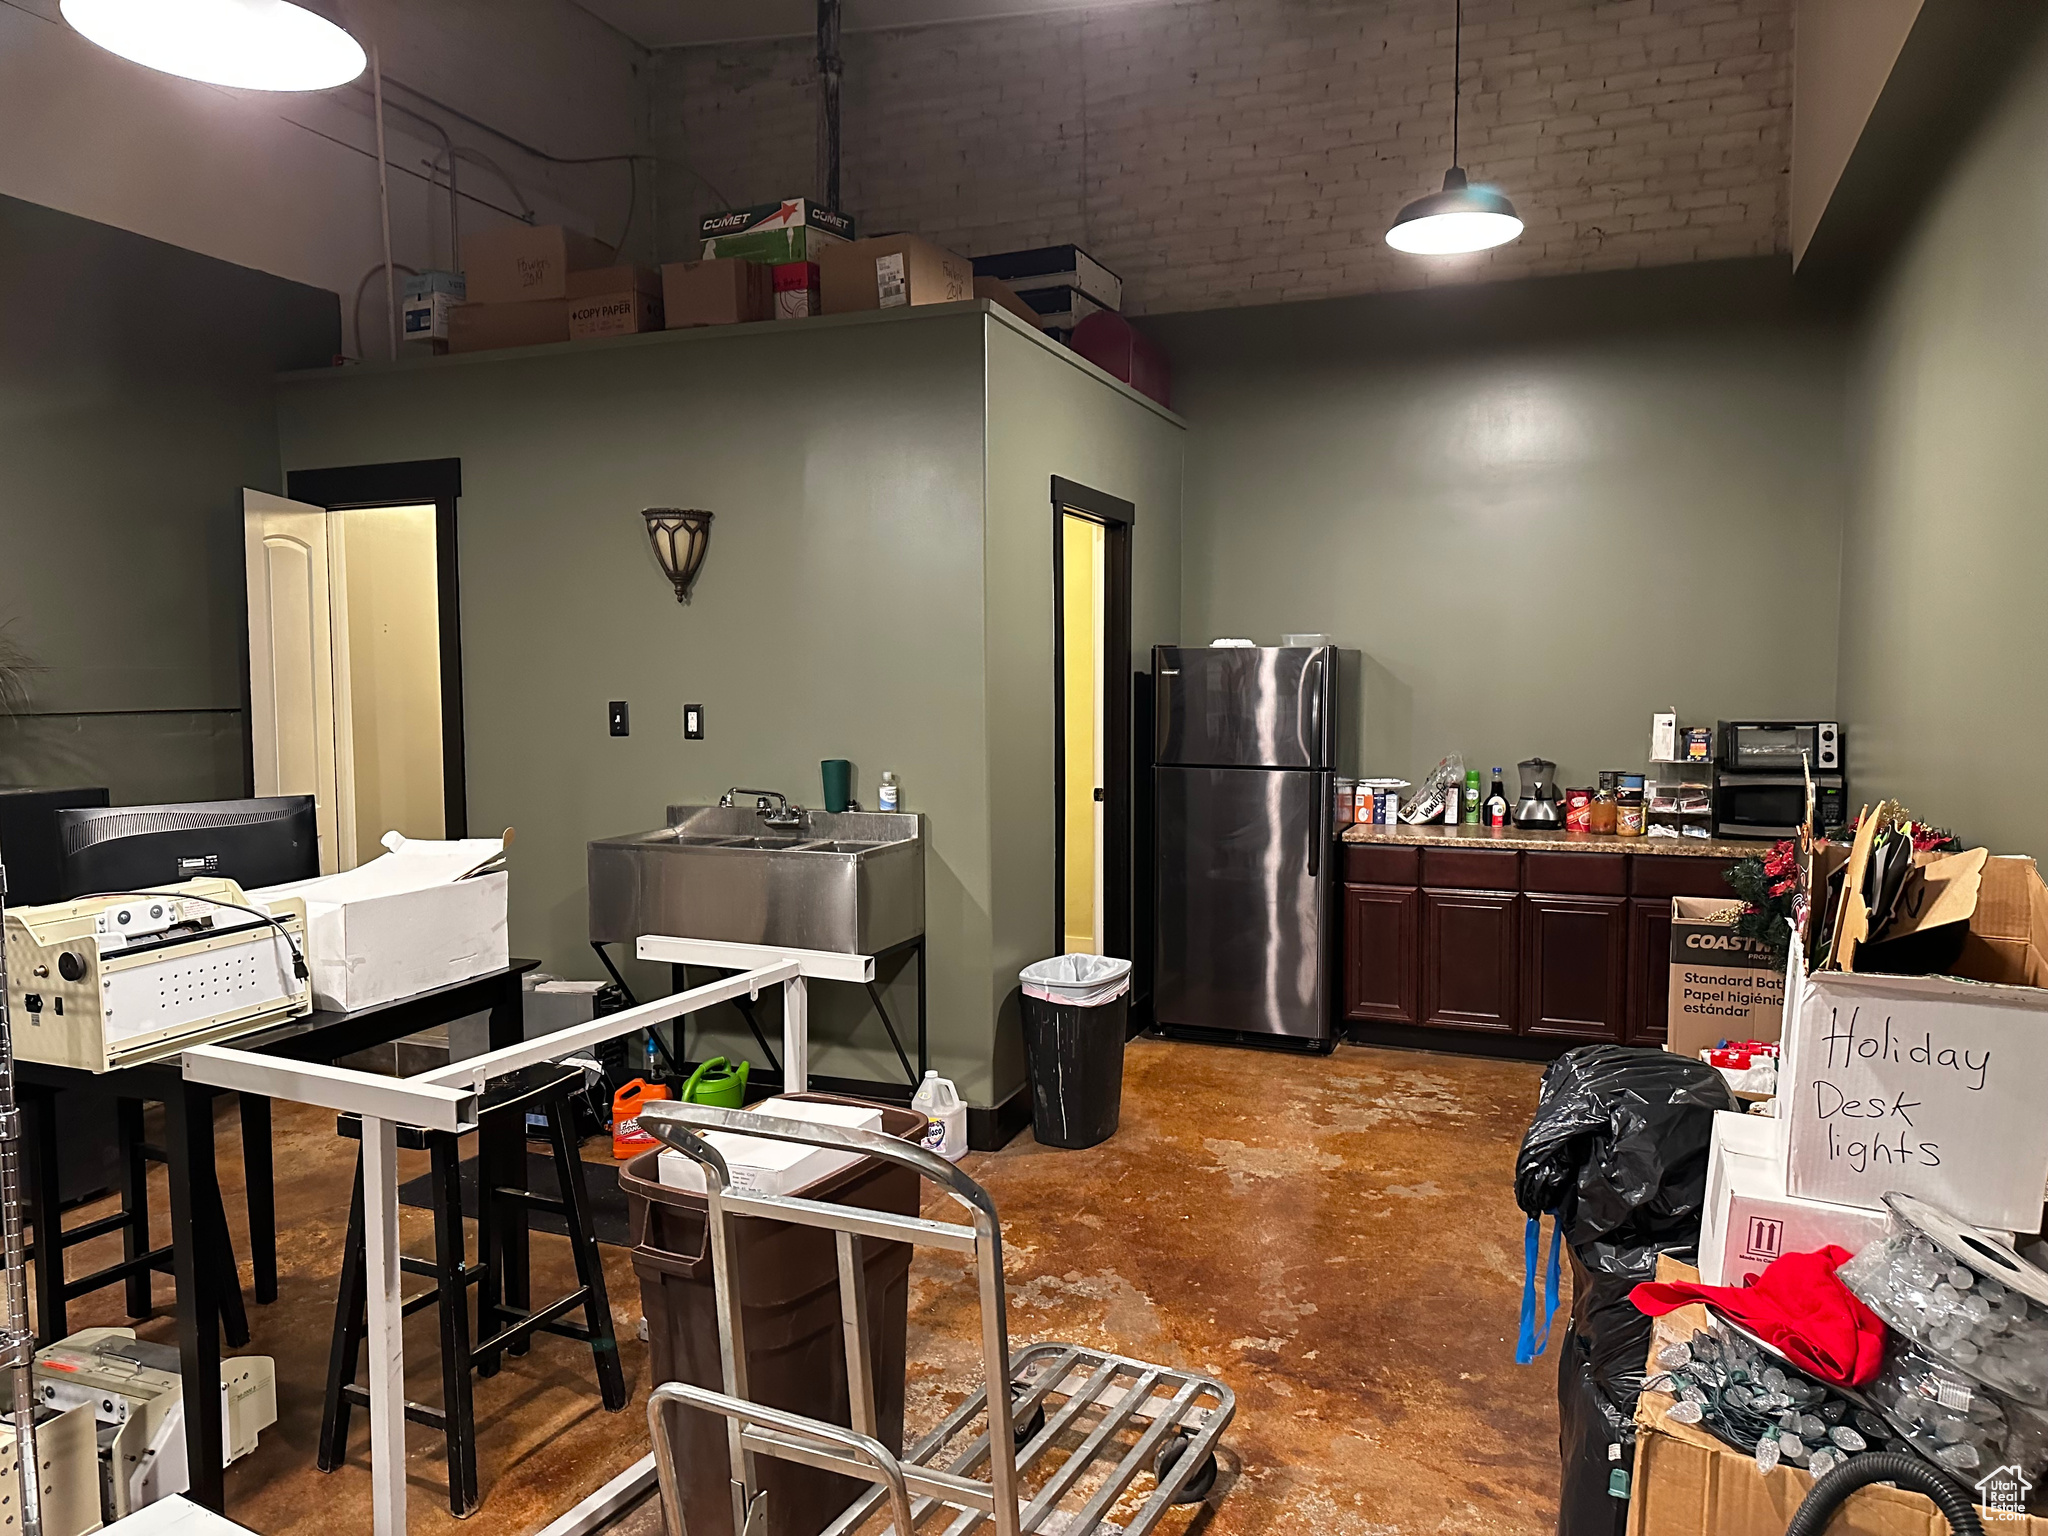 Employee kitchen, two baths and conference area